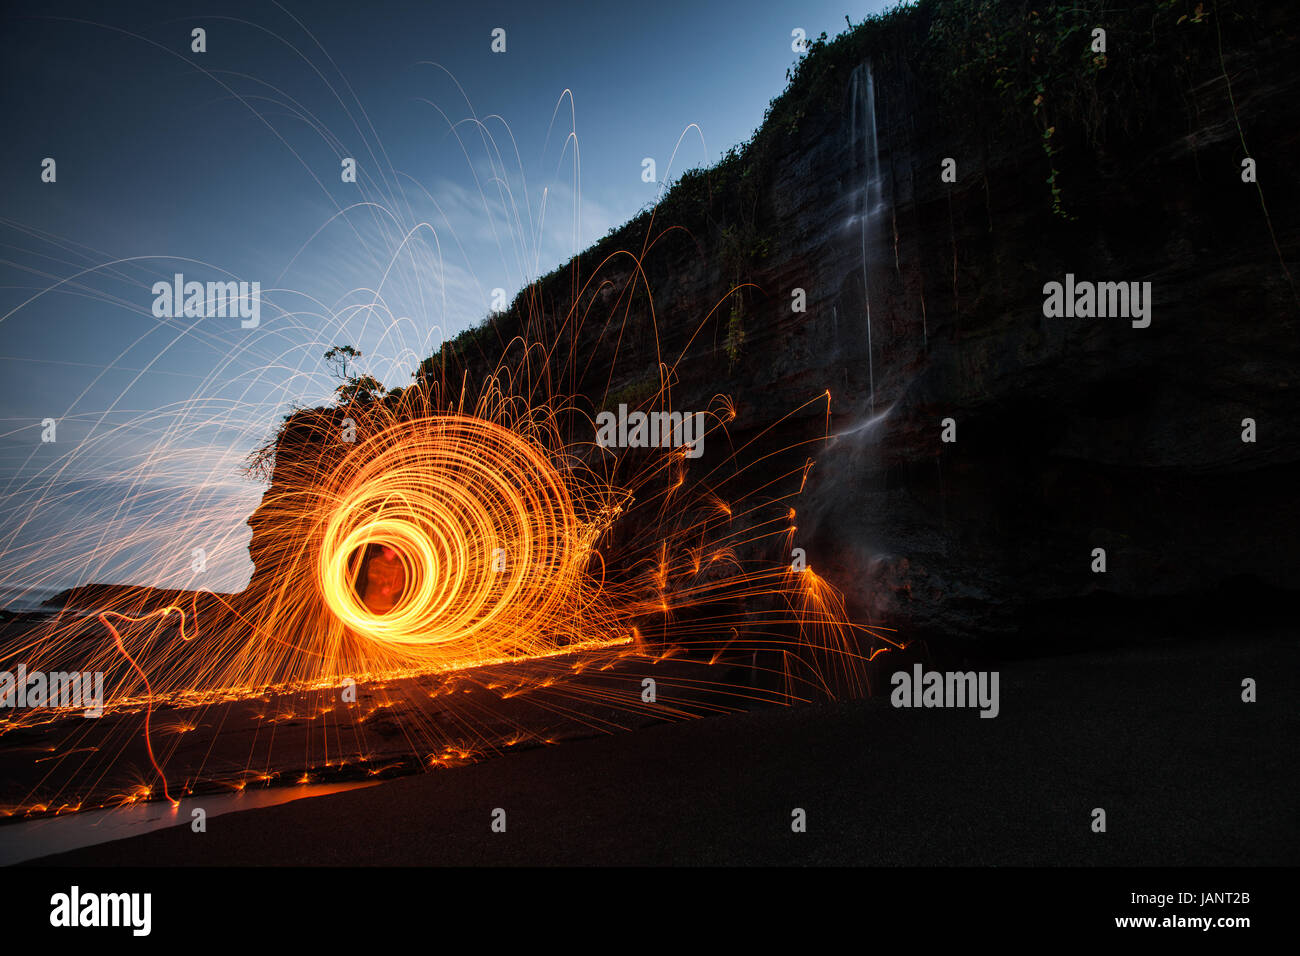 Circles of light created by light painting with burning wire wool at a beautiful spot on a Bali beach with a waterfall tumbling down a cliff face Stock Photo